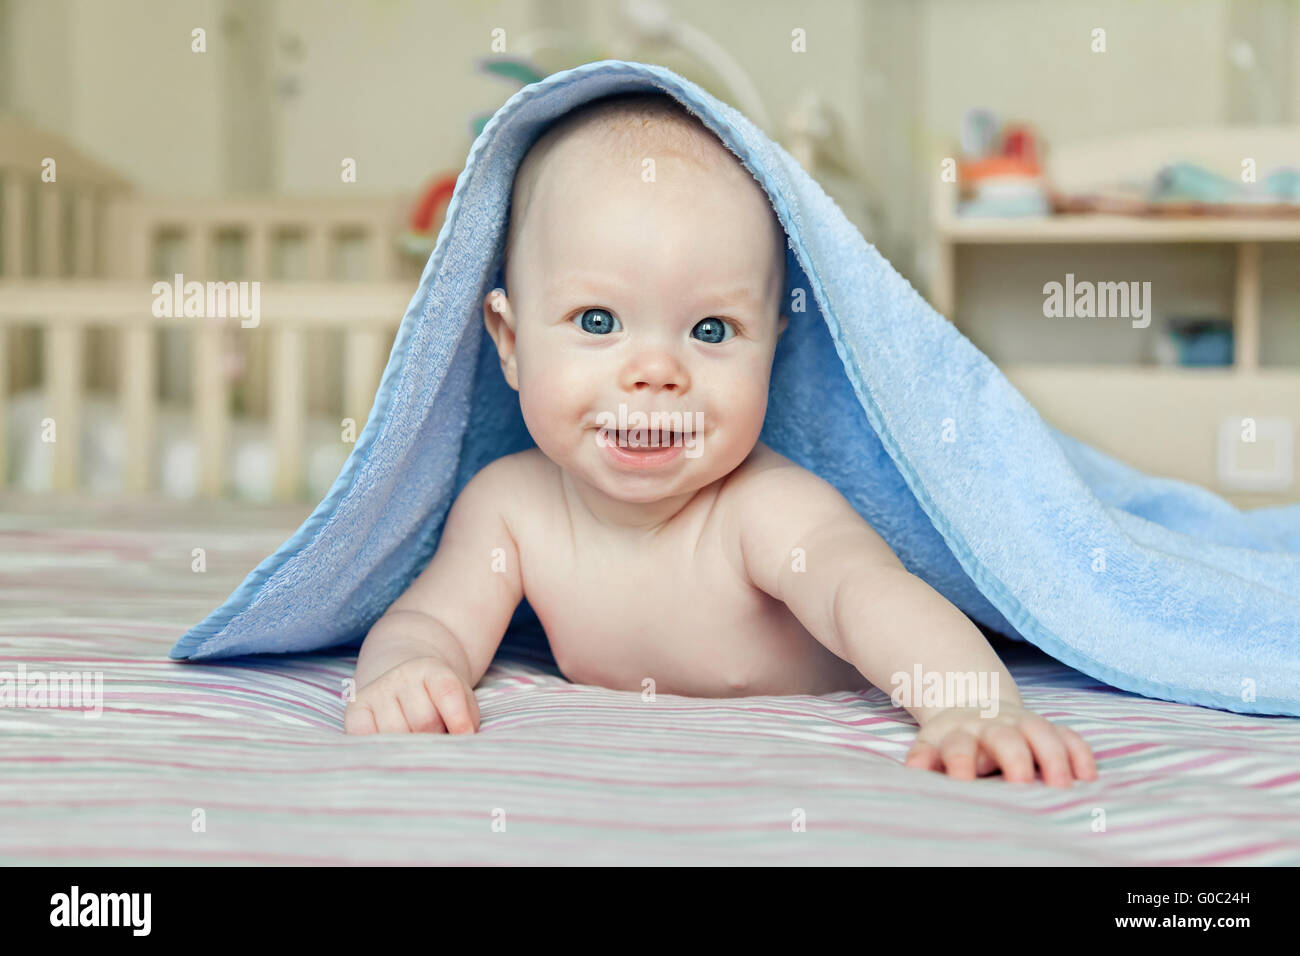 Portrait of a smiling baby with blue towel on his head Stock Photo